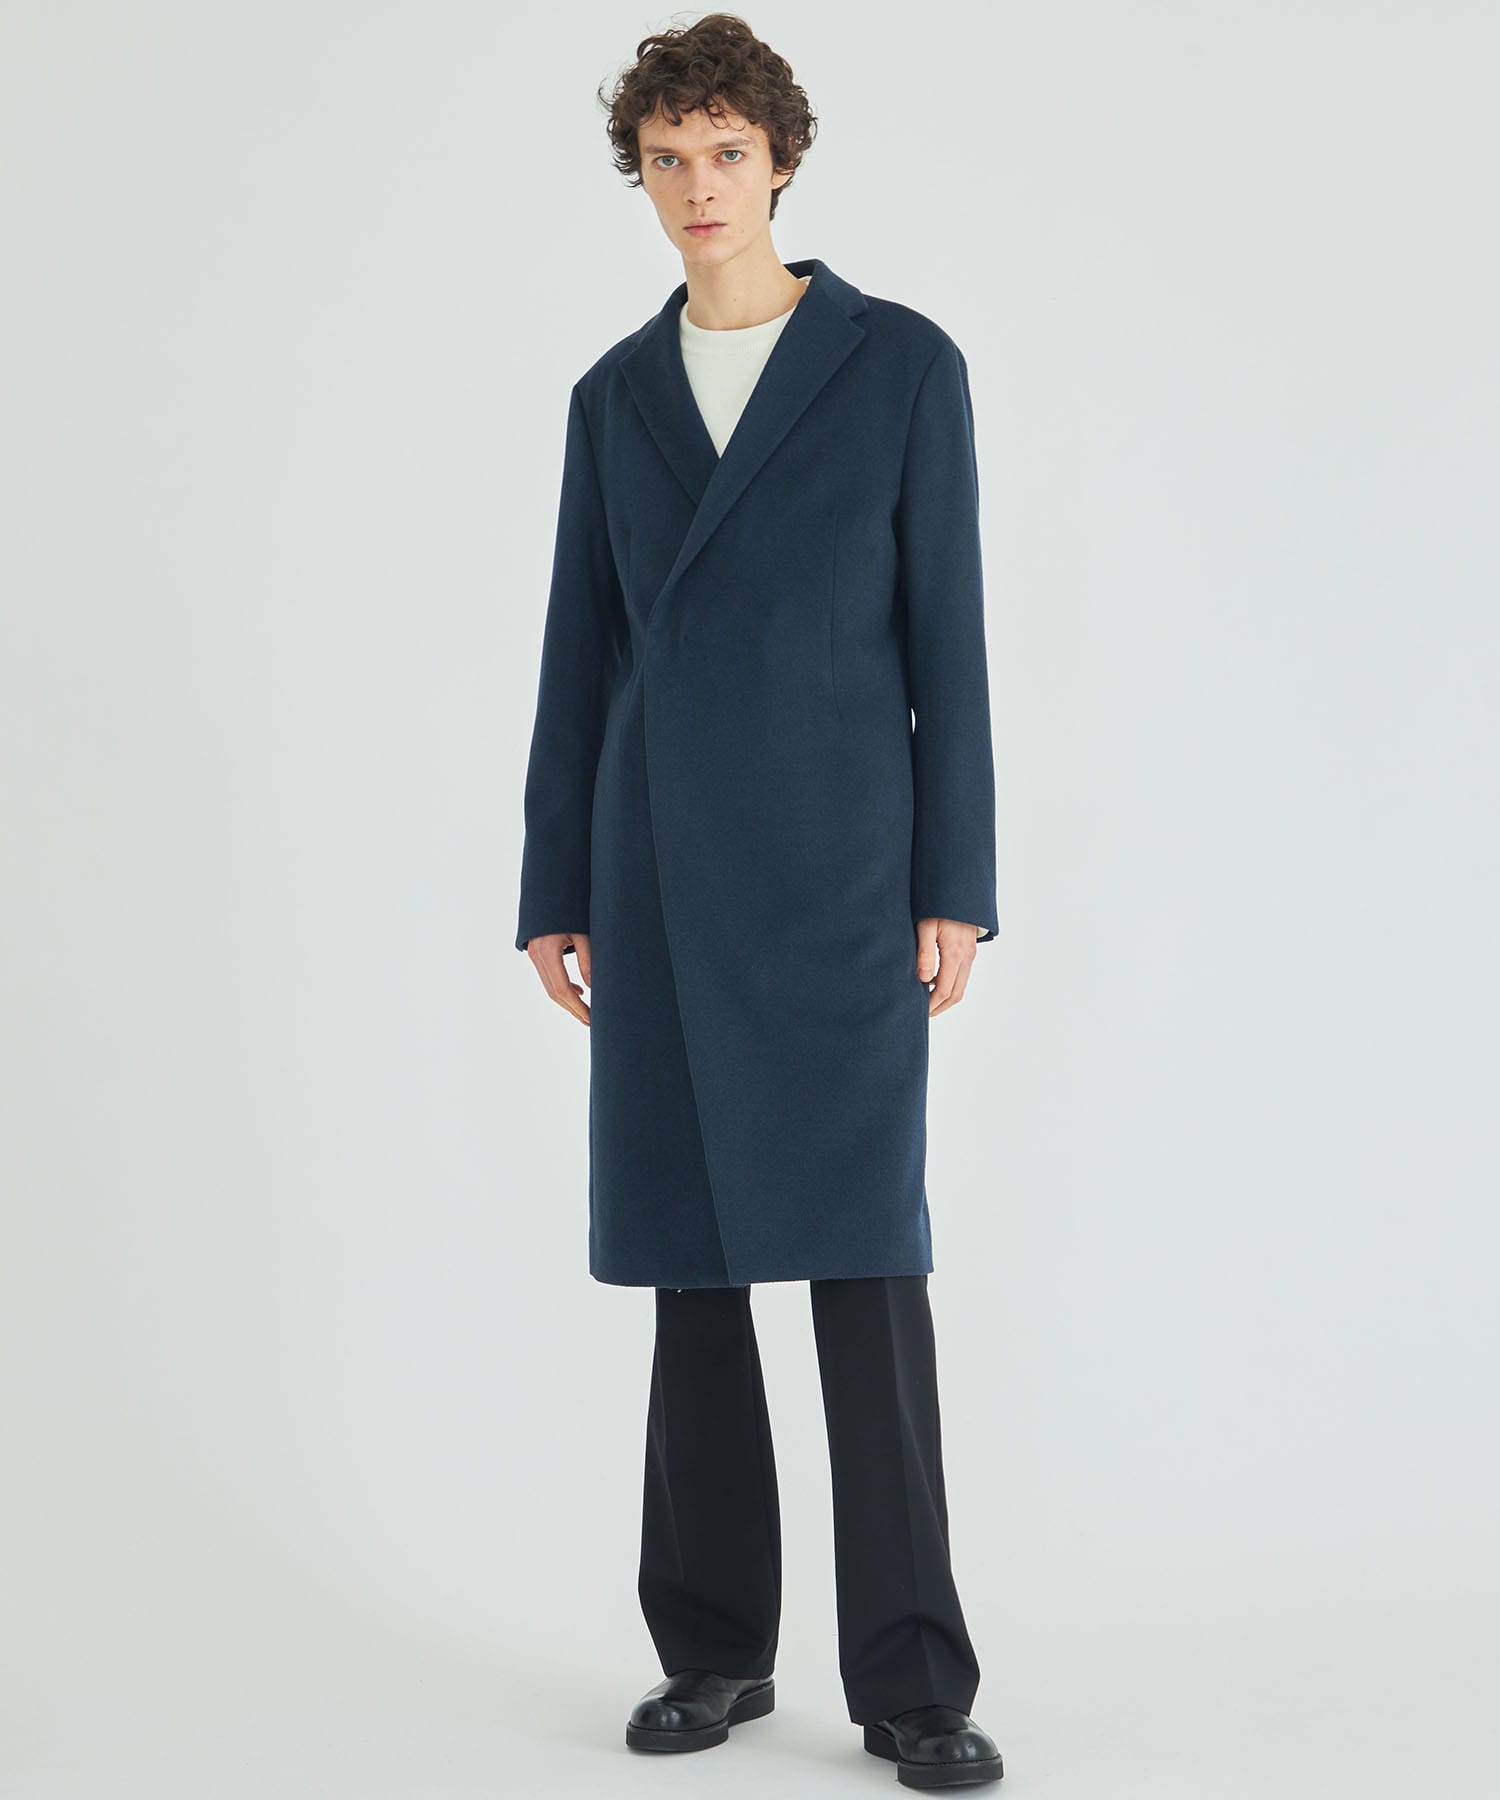 CASHMERE DOUBLE CHESTER COAT | BESPOKE TOKYO